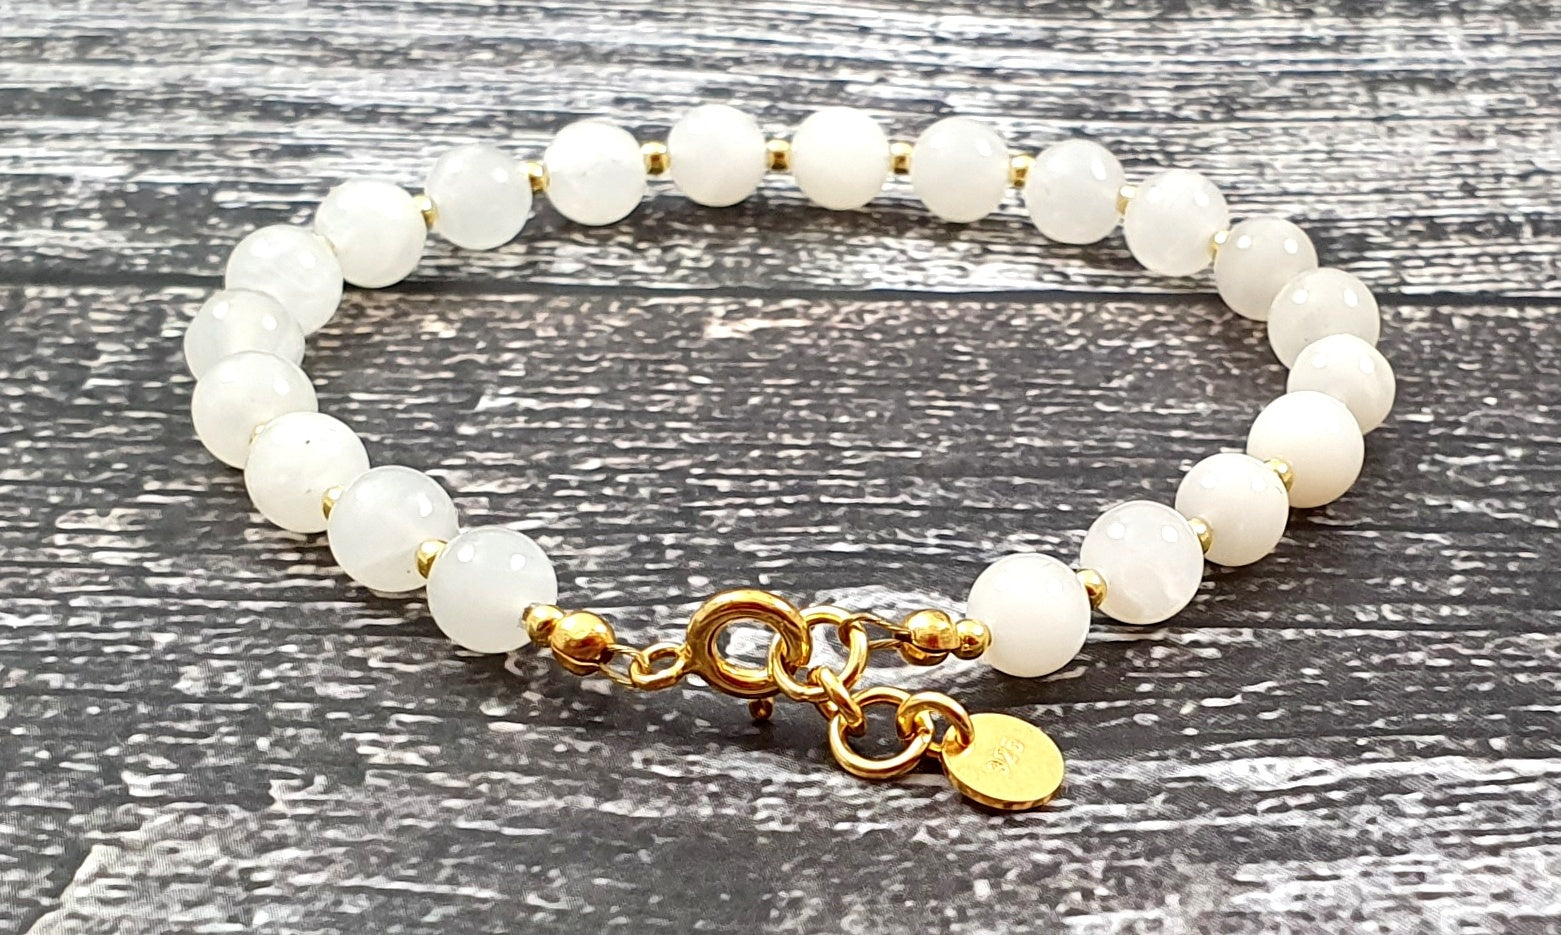 Moonstone White Bracelet With Silver Beads-3